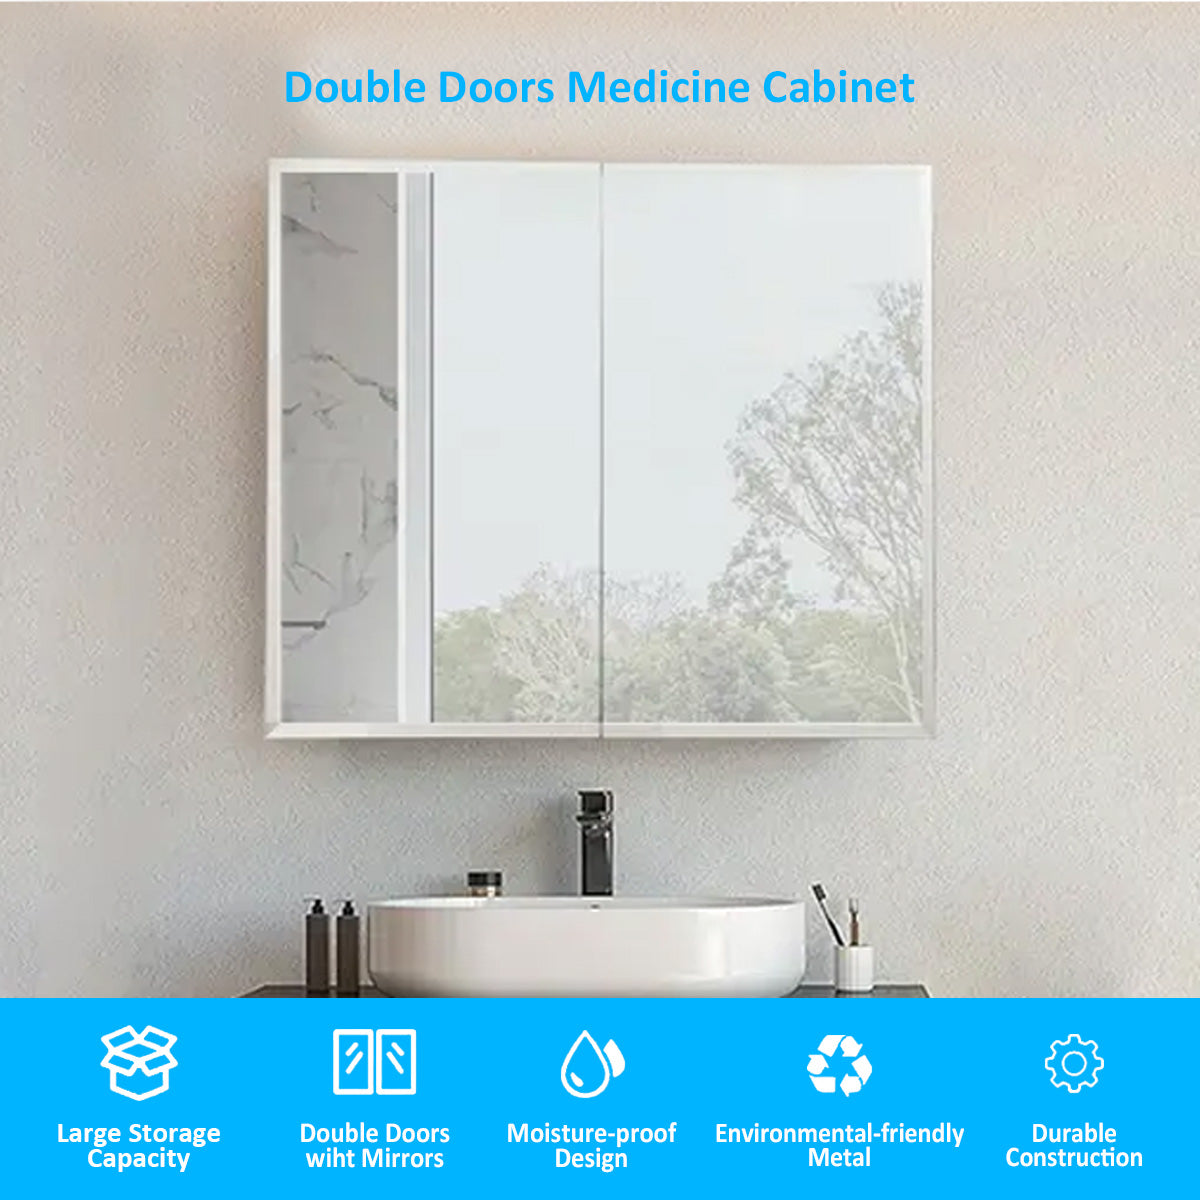 30 in. x 26 in. Frameless Medicine Cabinet with Mirror, Double Sided Mirror, 2 Doors 3-Adjustable Shelves, Soft-Closing, Surface Mount or Recessed Medicine Cabinets for Bathroom, Bedroom, Hotel